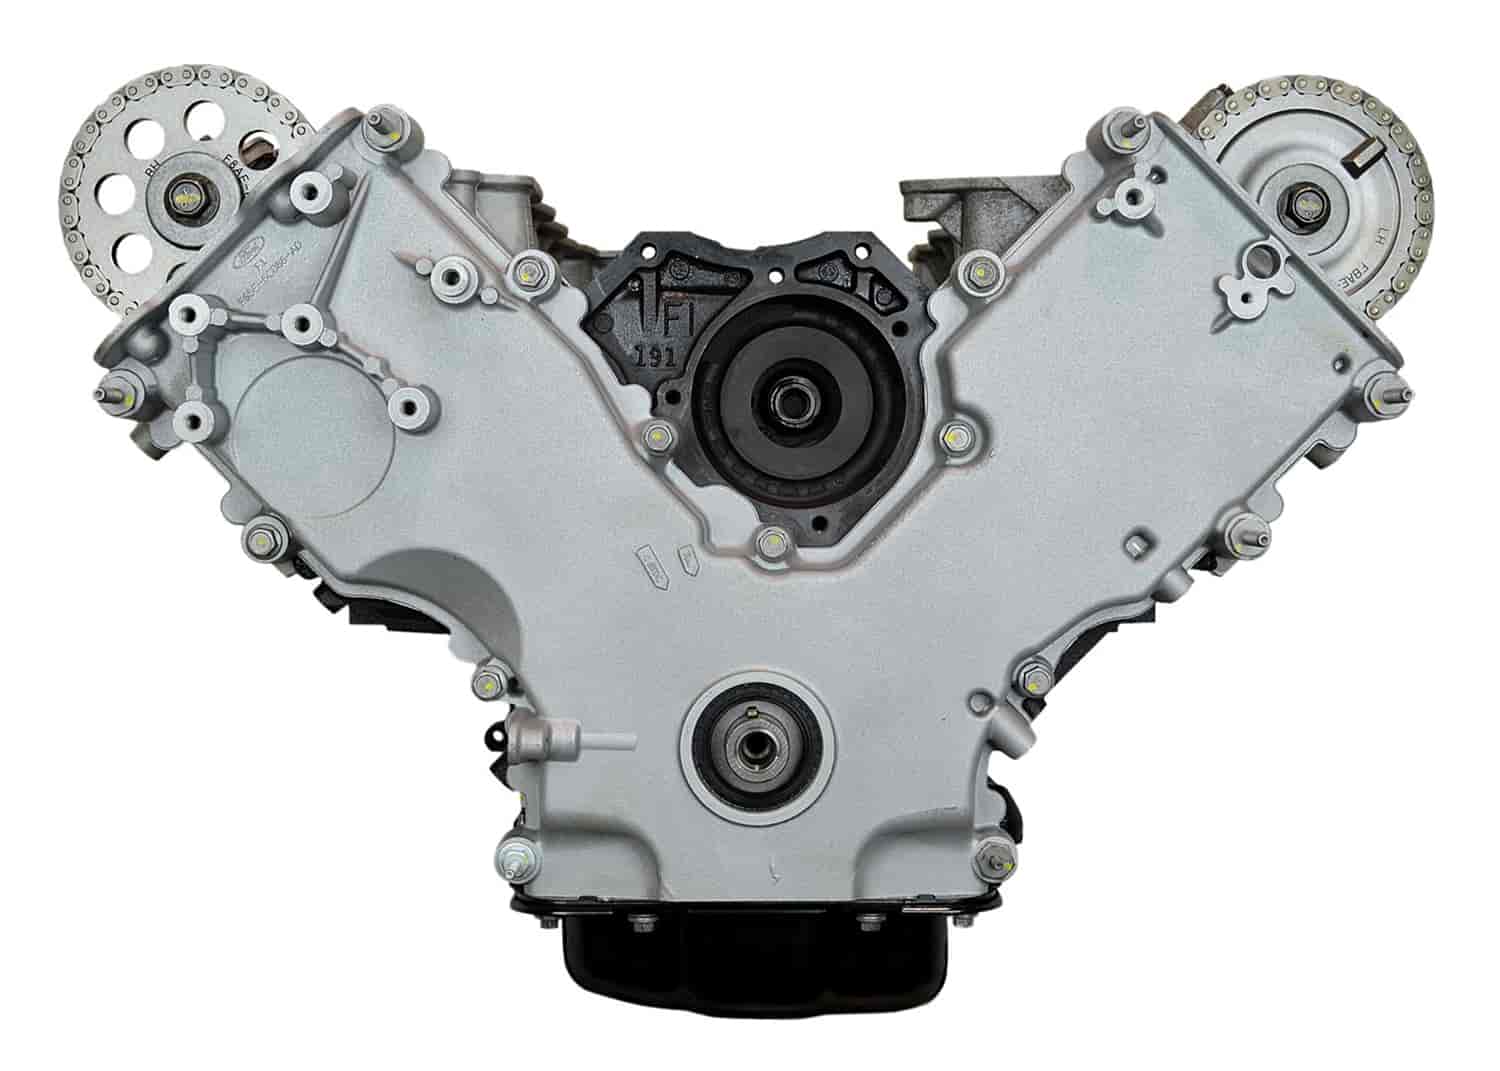 Remanufactured Crate Engine for 2001 Ford E-Series Van